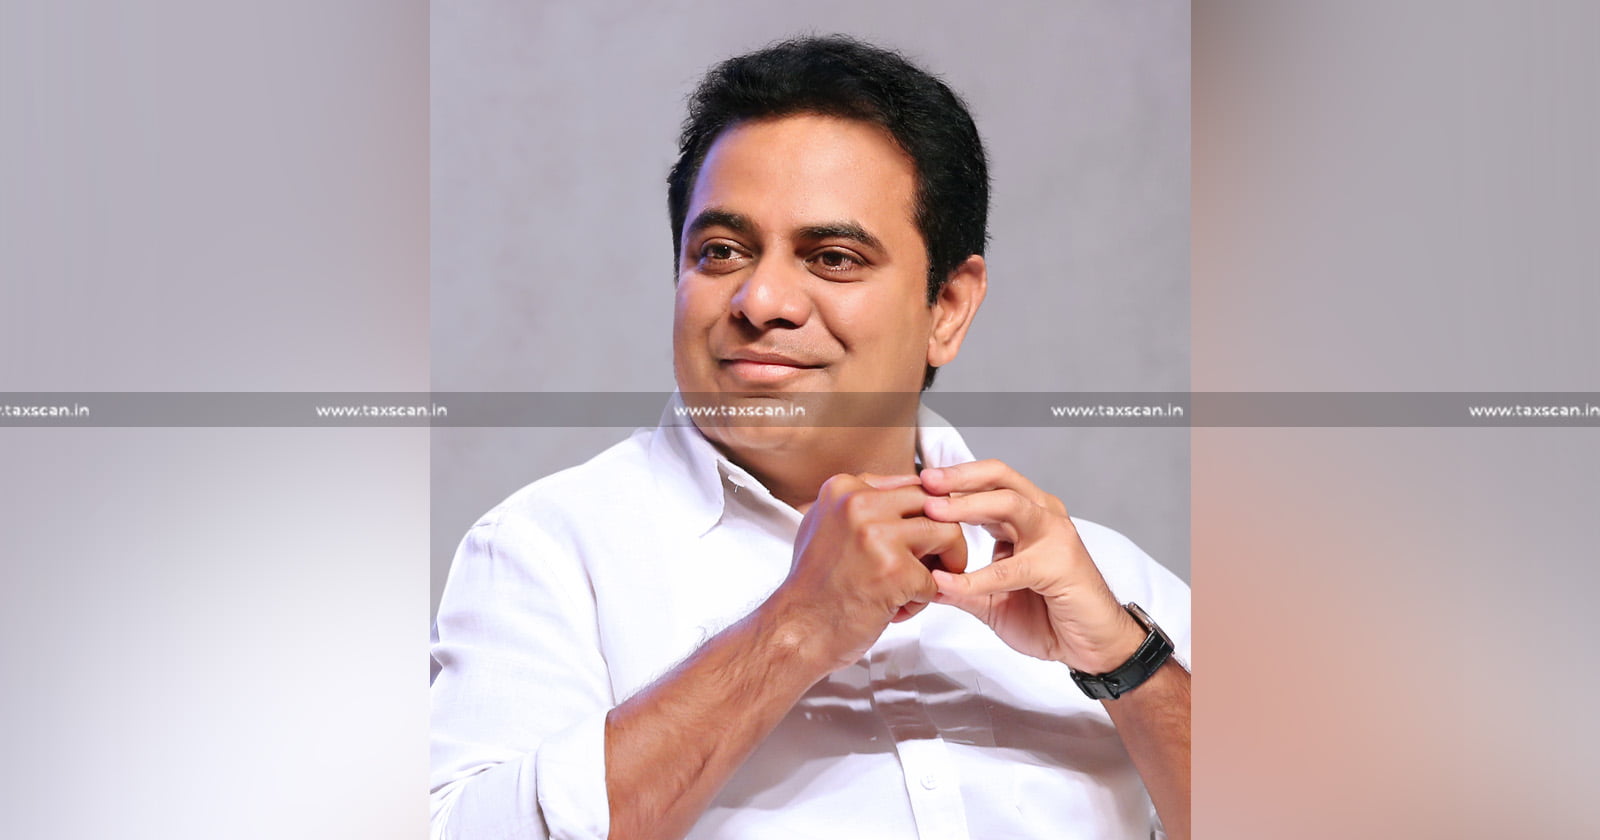 Telangana Minister K T Rama Rao - GST on Medical devices - central Govt - GST - Medical devices and Diagnostics - taxscan